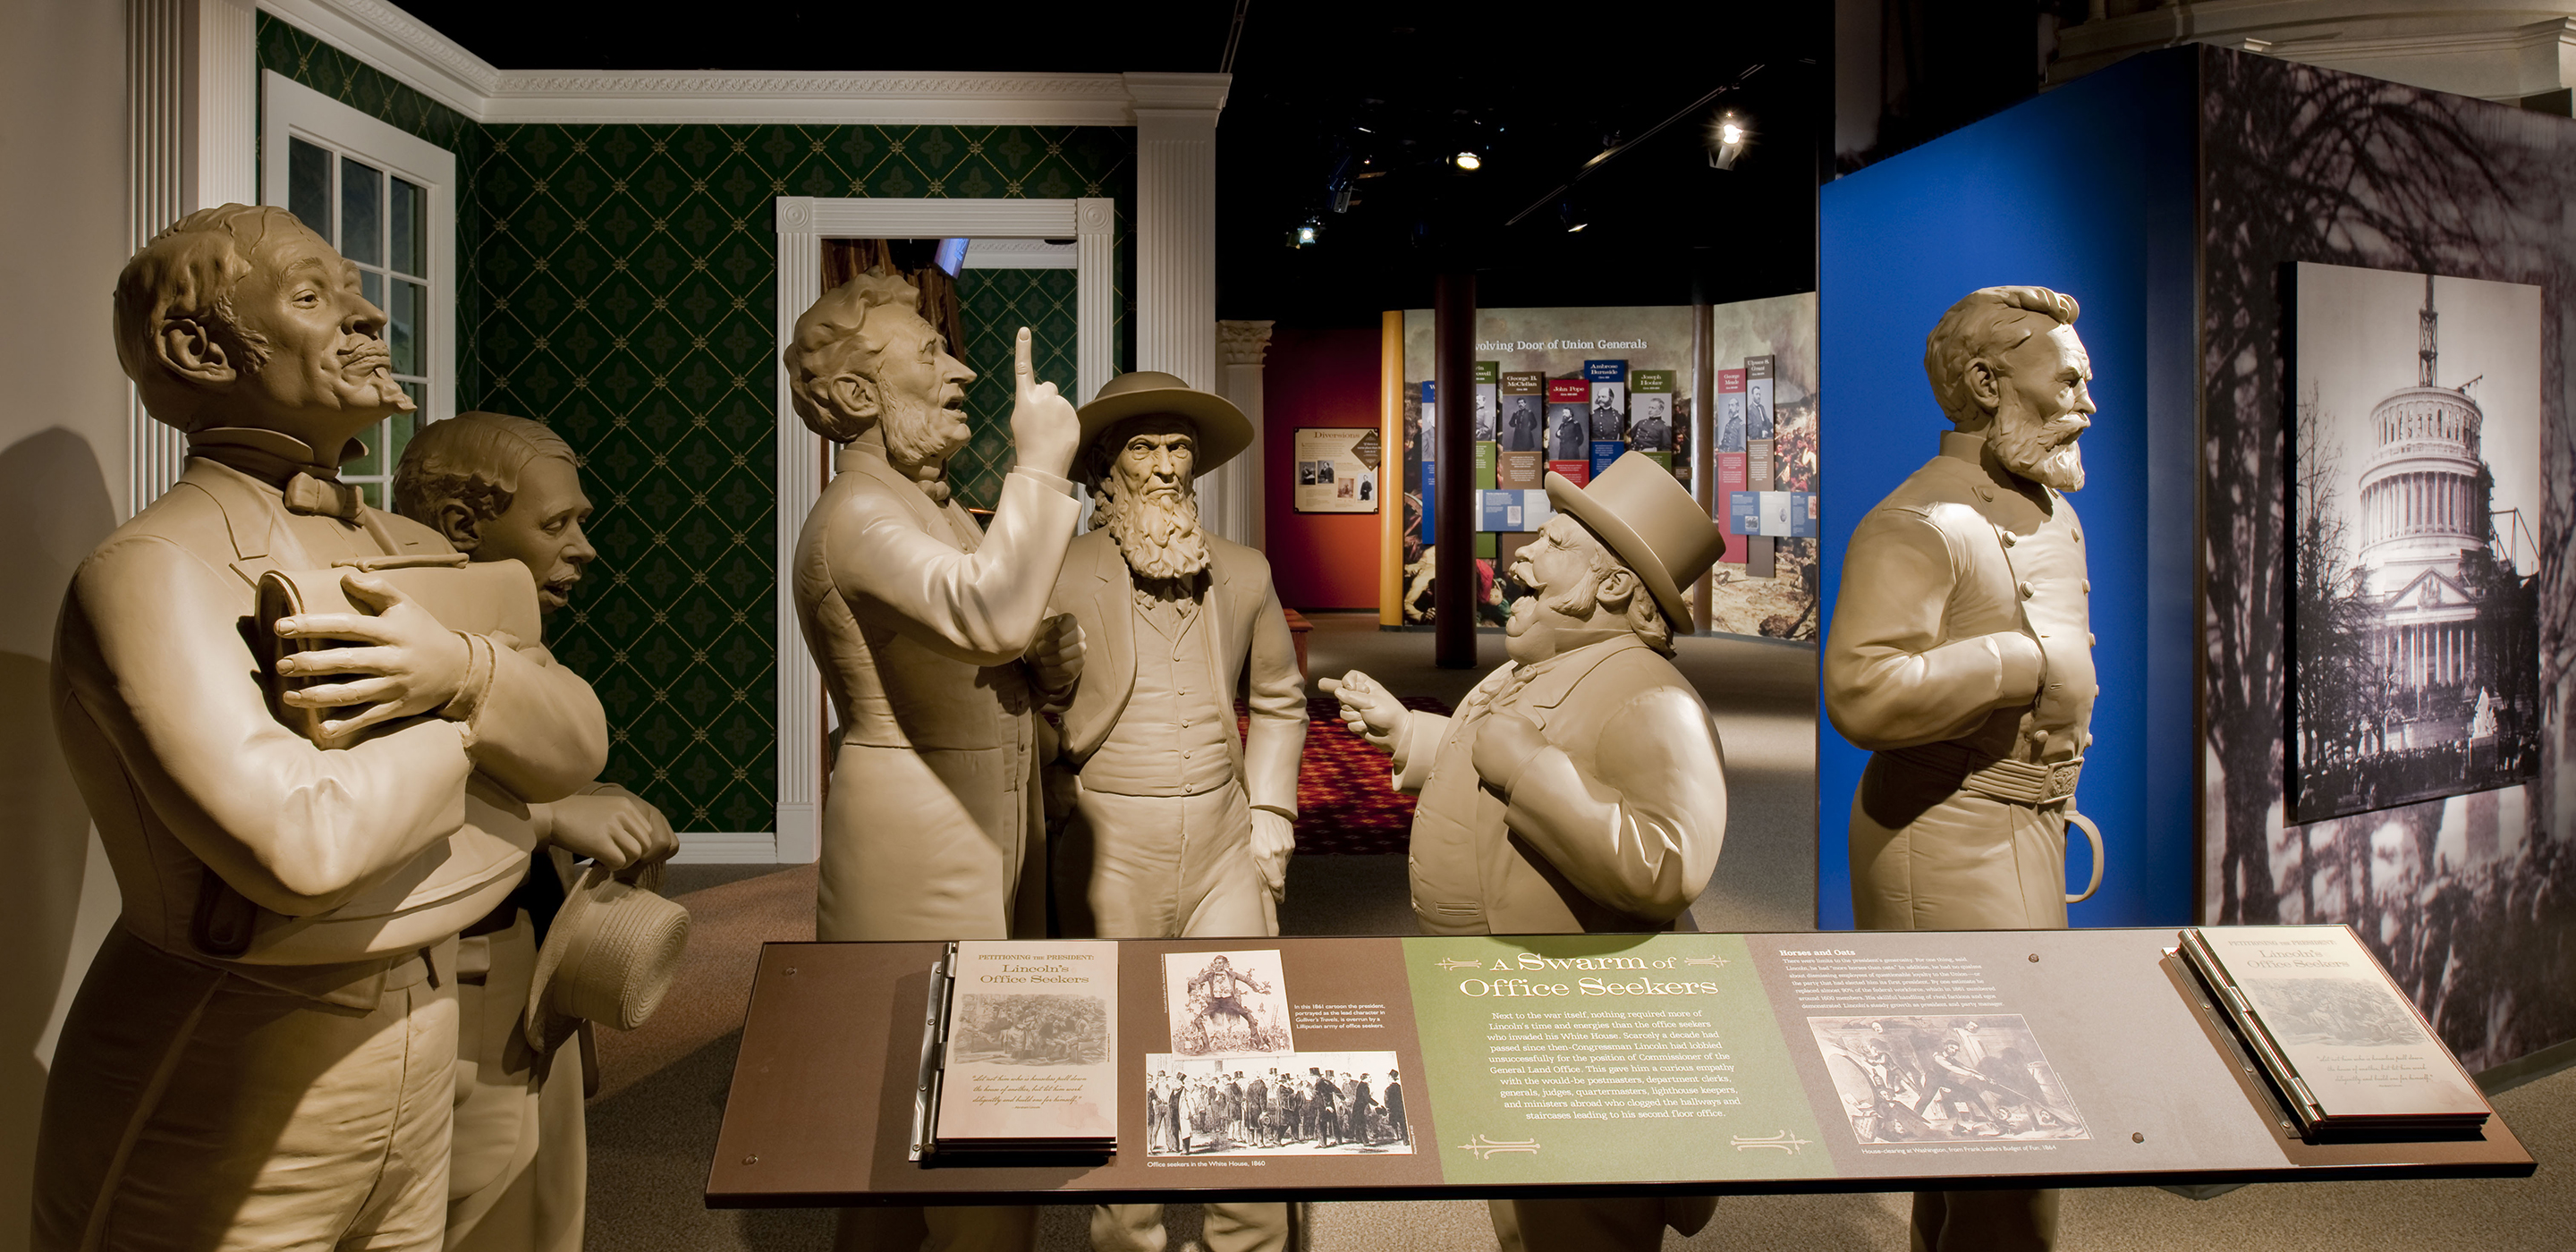 A museum display of six all-white statues of men from the 1860s, which represent the jobseekers and visitors to the Lincoln White House. In the center, a man in a suit raises a finger as he speaks. Opposite him, a short man in a top hat is pointing to him with his mouth open, as if they are engaged in a debate.